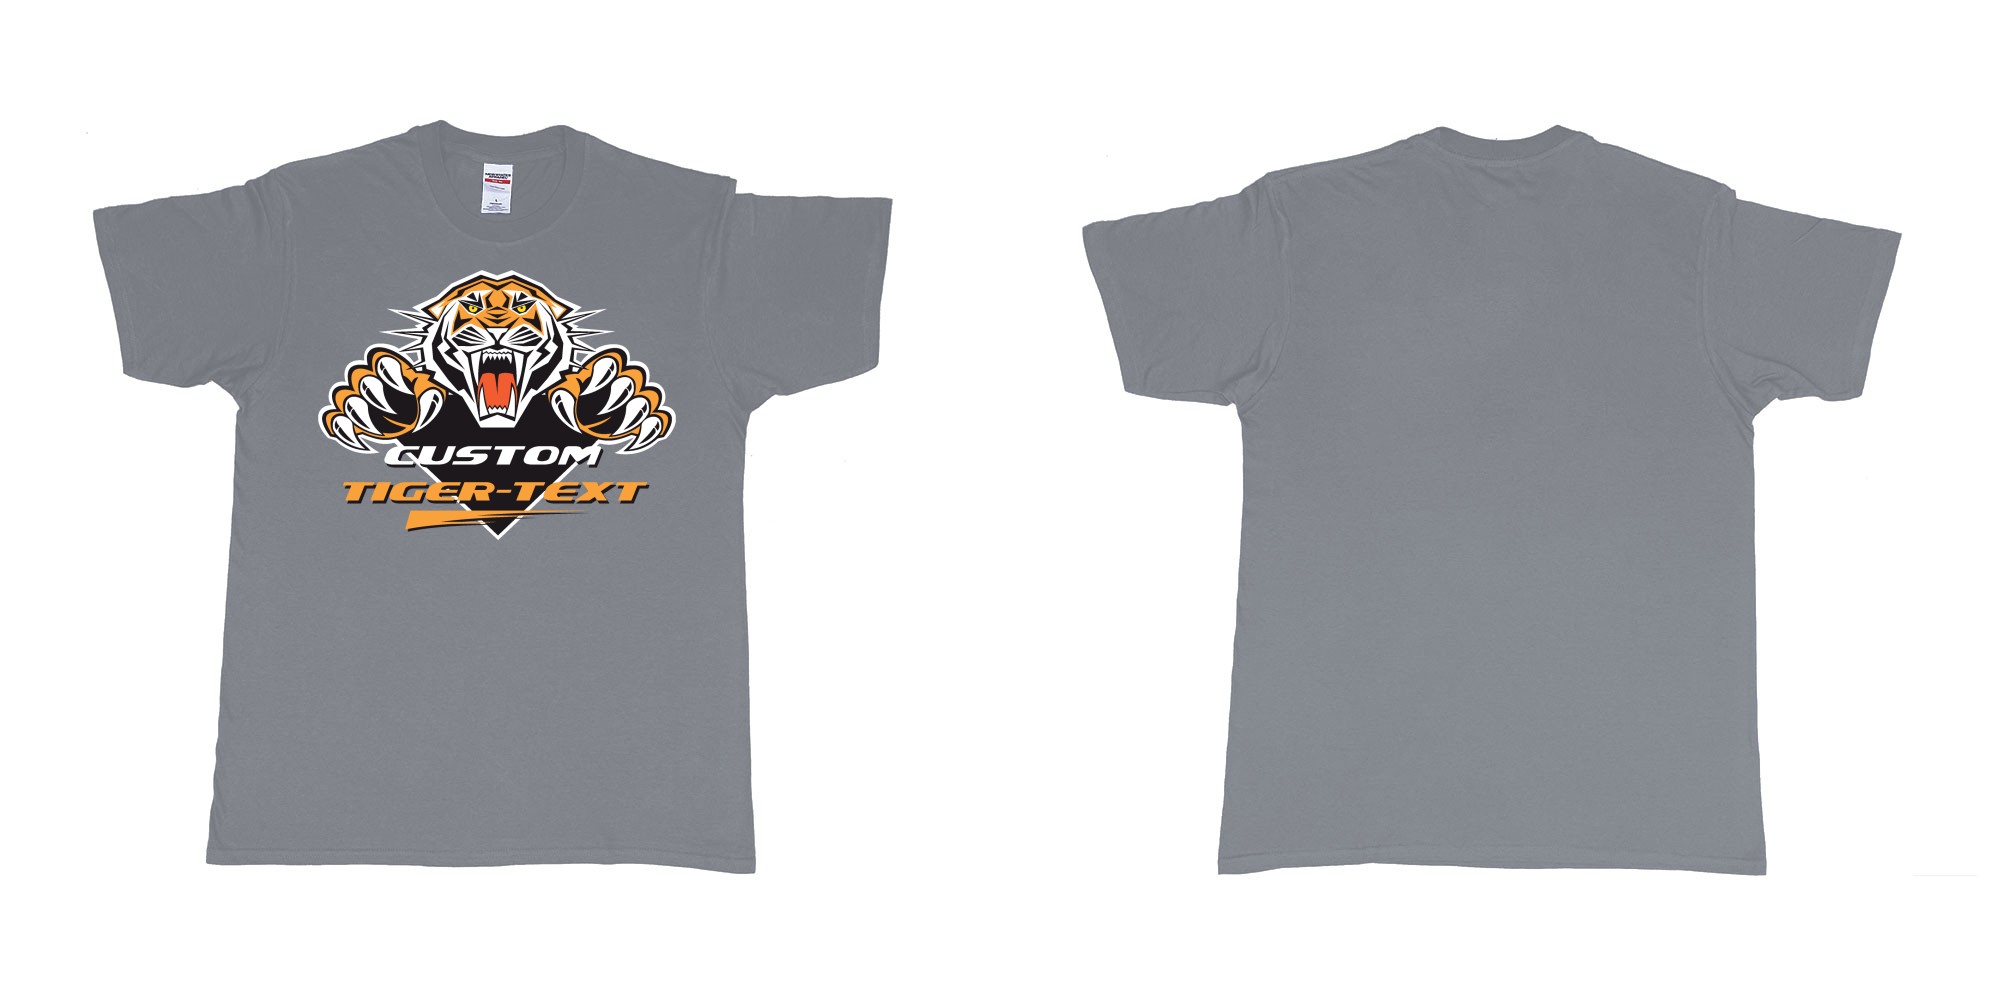 Custom tshirt design the wests tigers sydney national rugby league custom tshirt print in fabric color misty choice your own text made in Bali by The Pirate Way